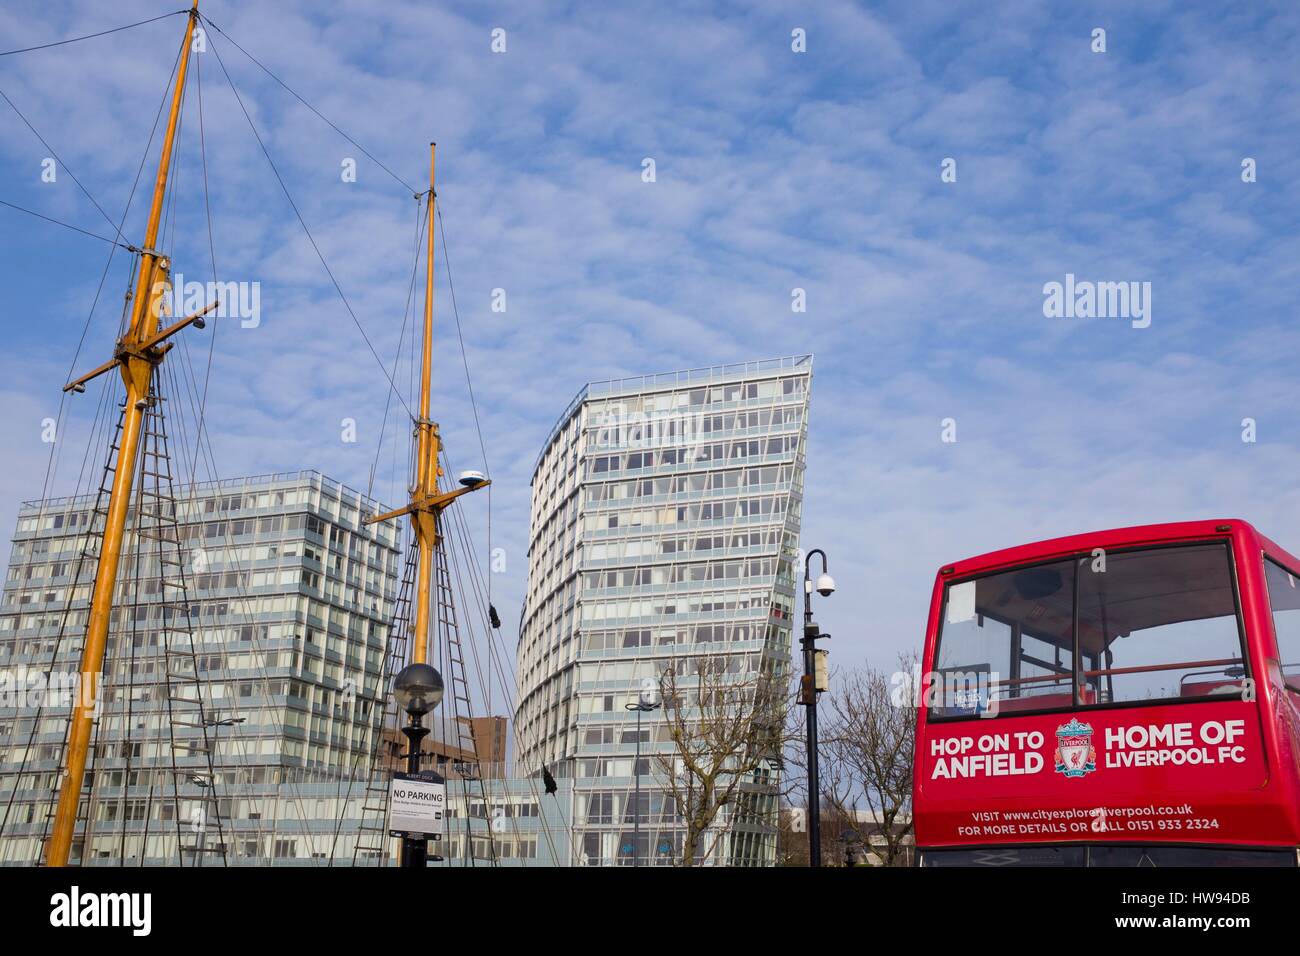 Tall boat mast and red tour bus in contrast to modern office blocks in Liverpool Stock Photo